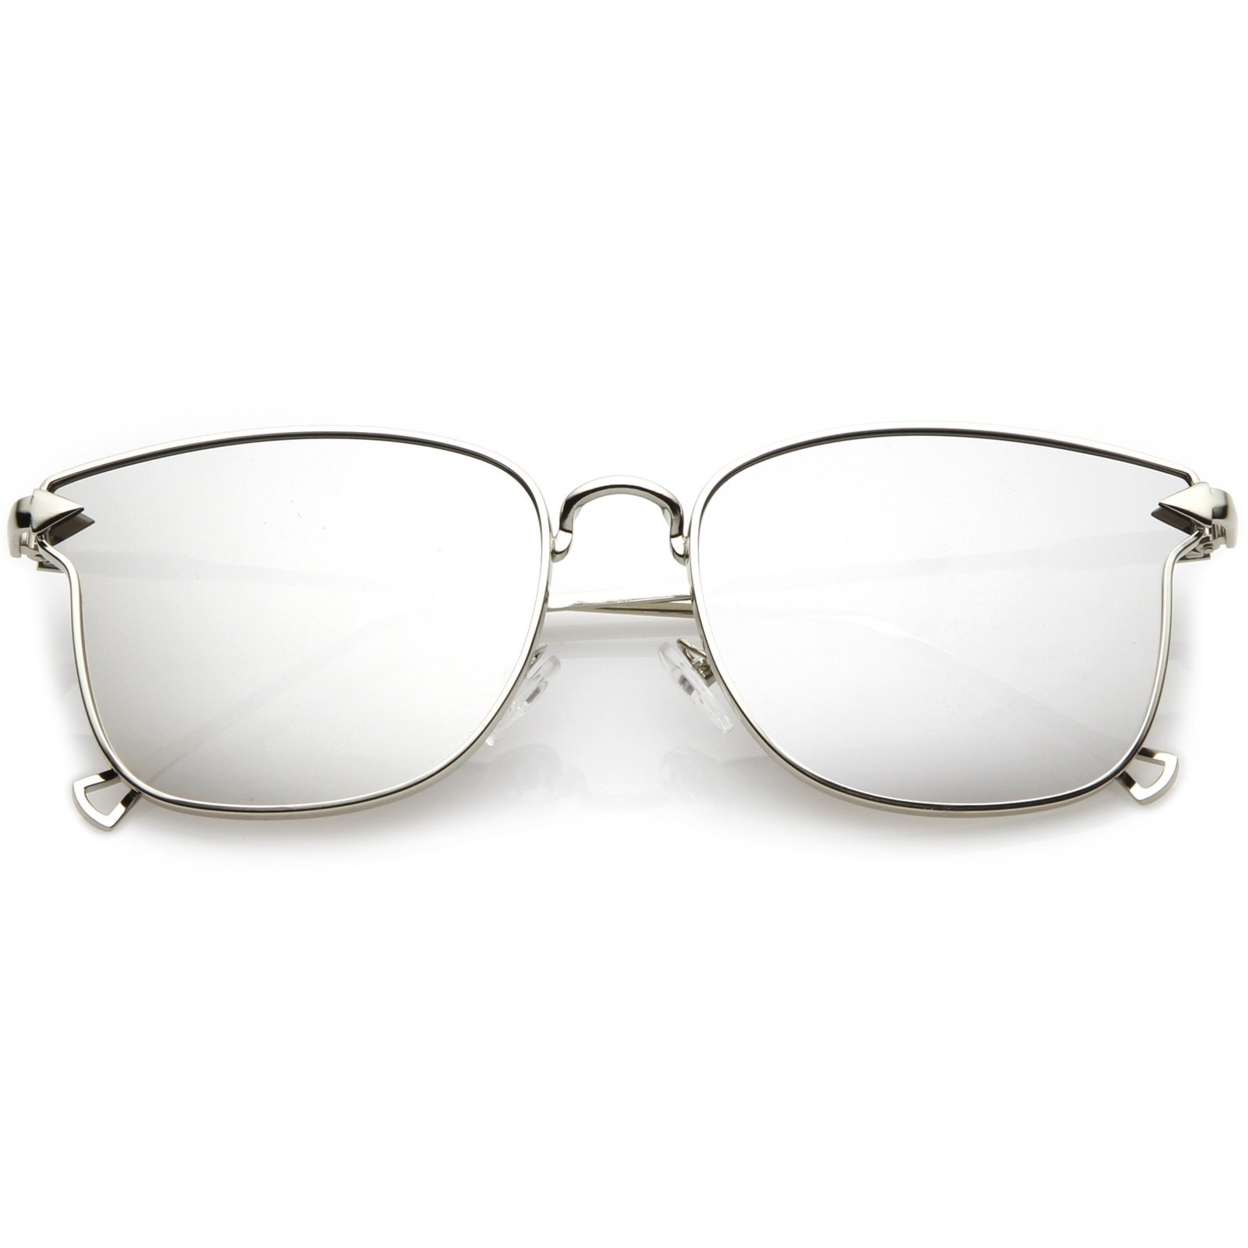 Modern Metal Square Sunglasses With Mirrored Flat Lenses And Slim Hook Arms 55mm - Silver / Silver Mirror